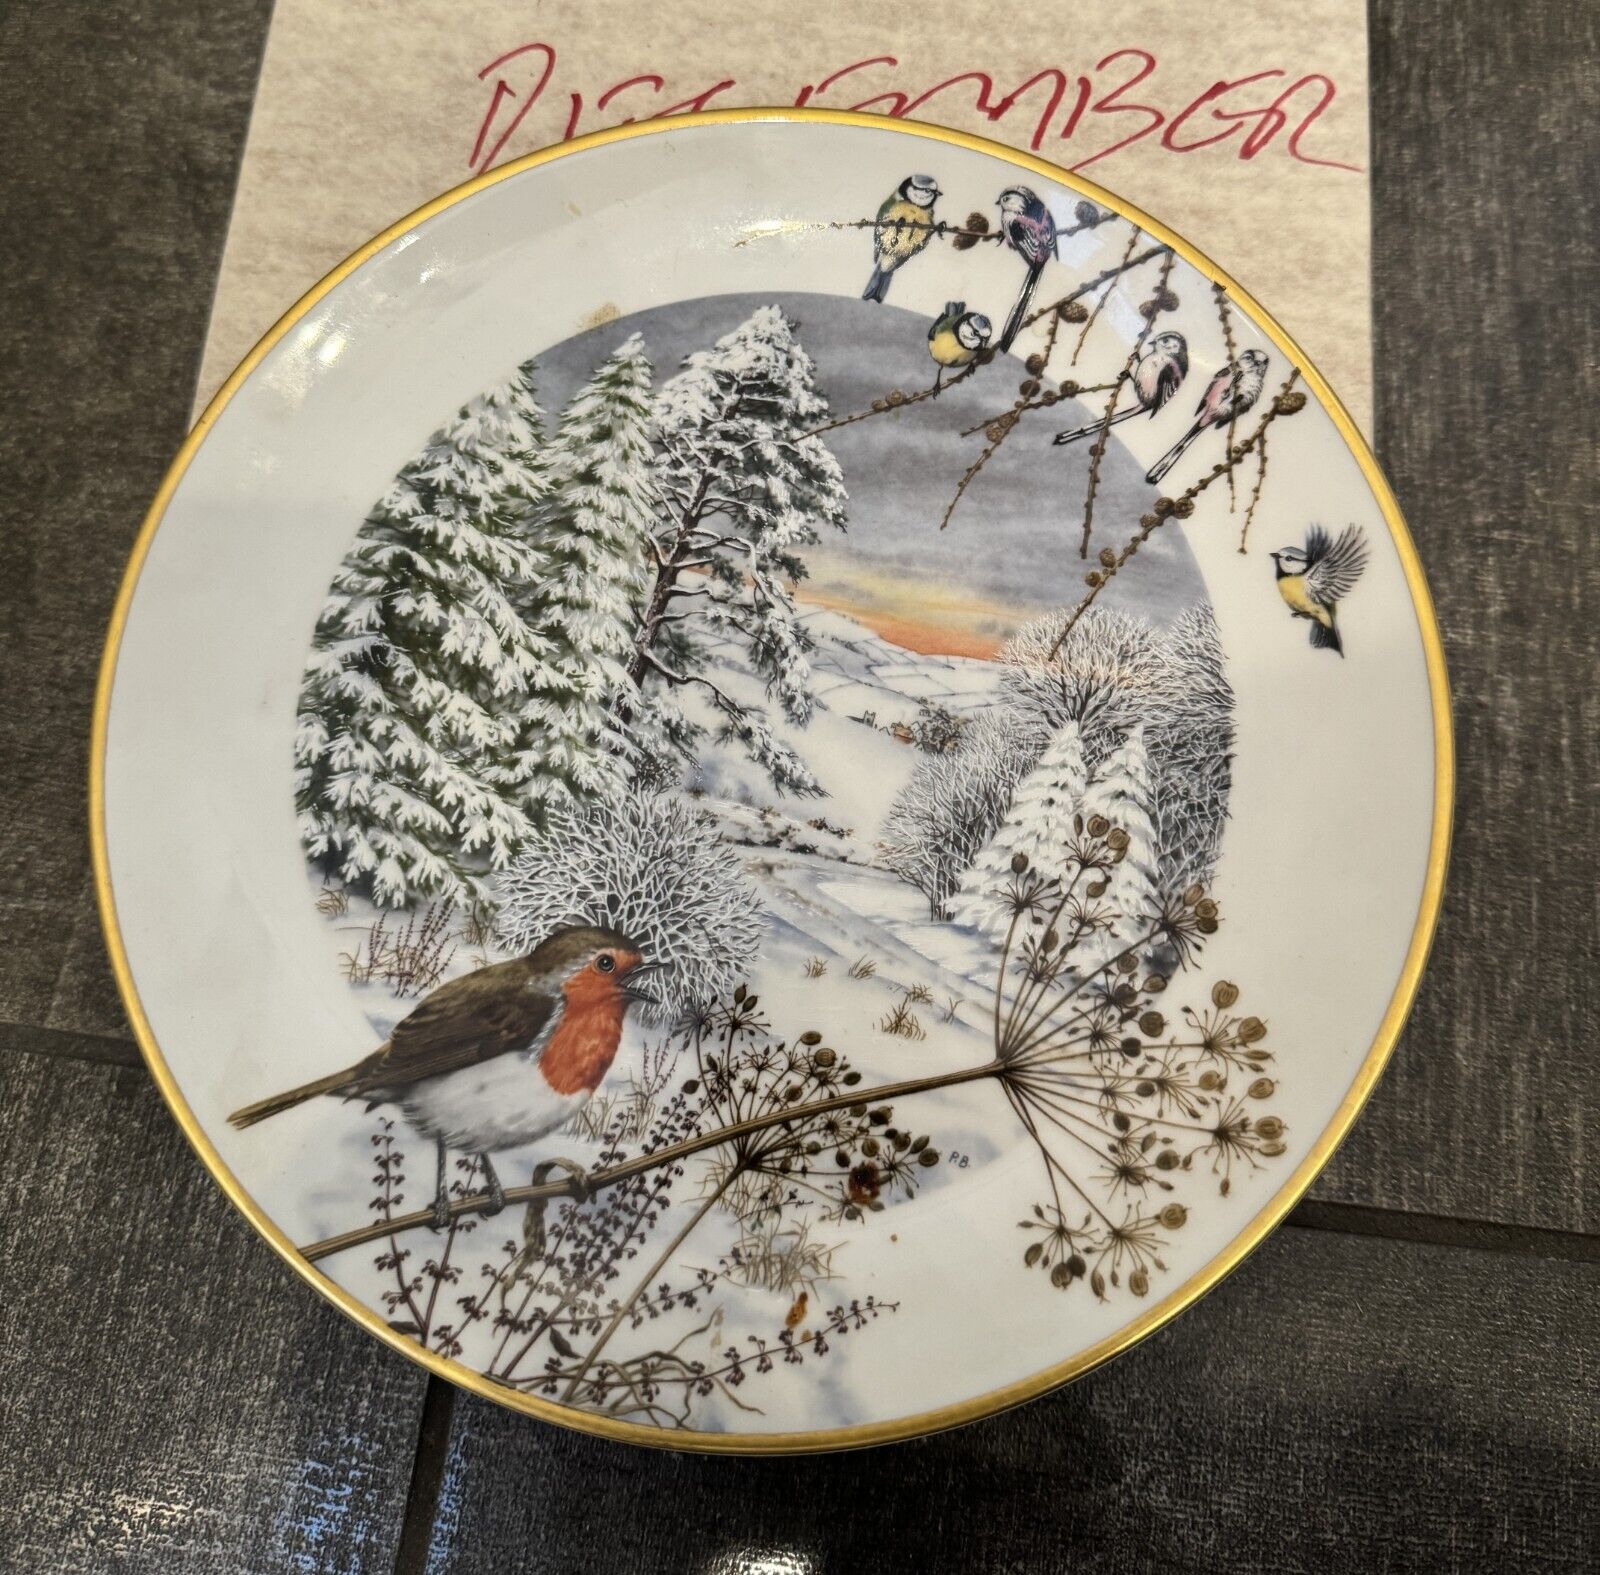 COLLECTOR PLATE BY PETER BANETT - A COUNTRY LANE IN DECEMBER